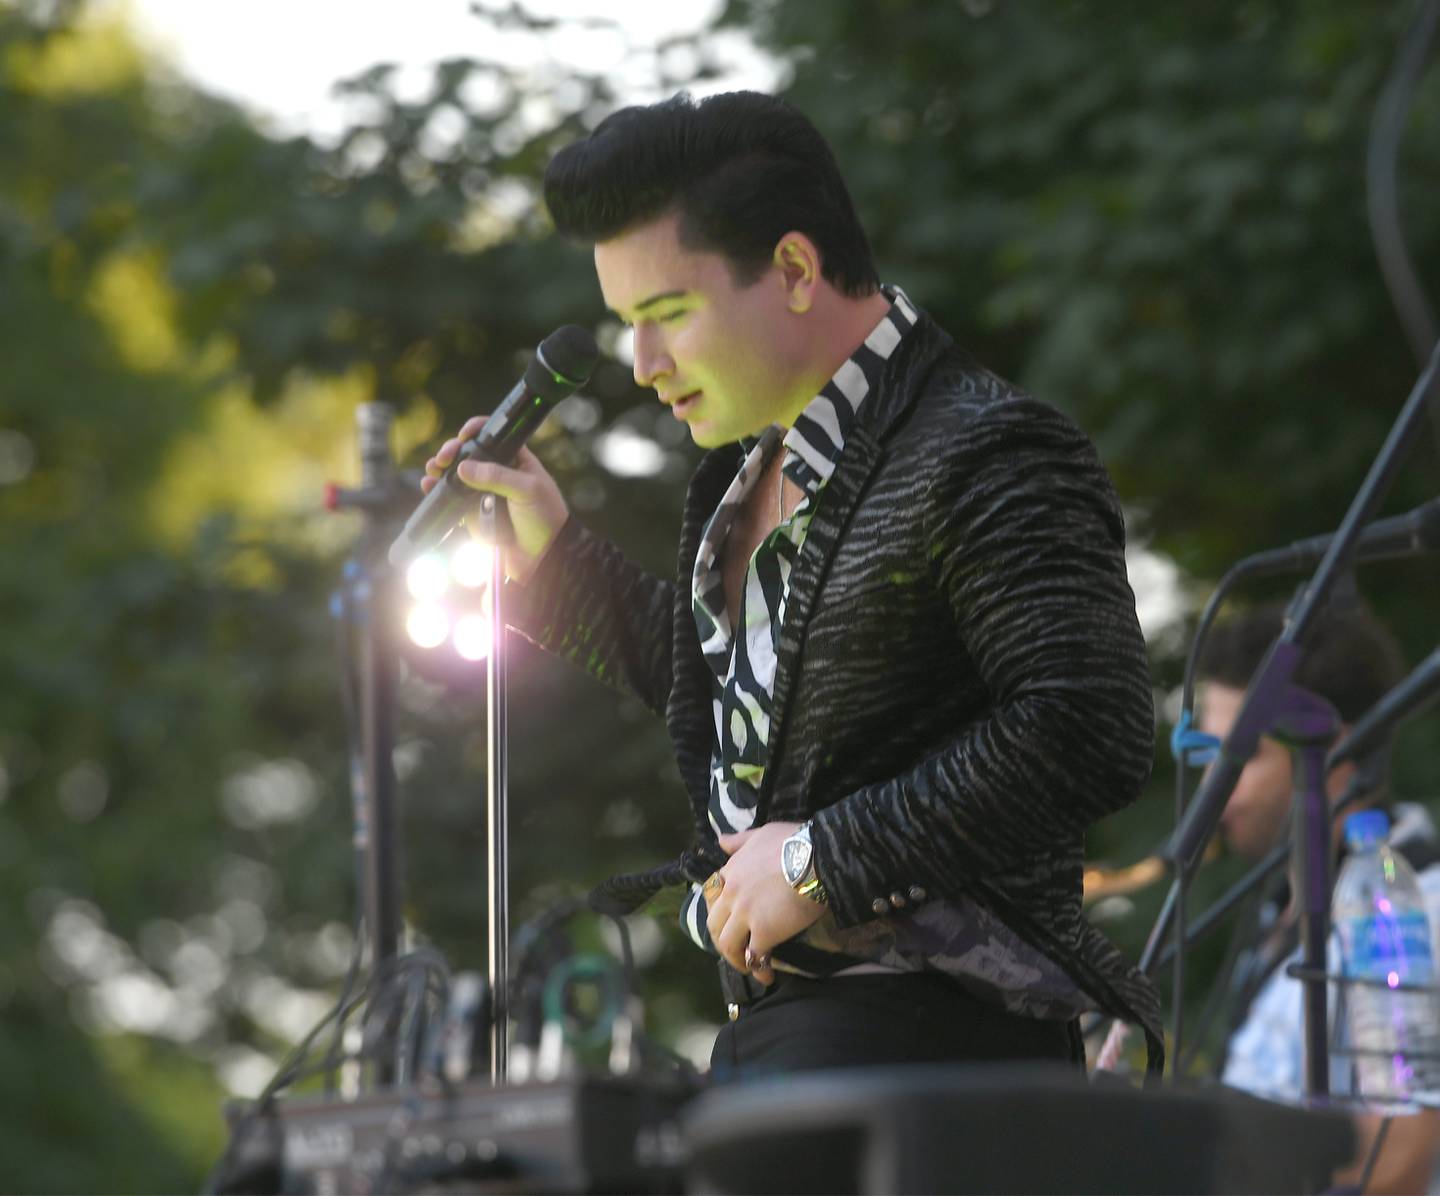 Jonny Lyons performs an Elvis Presley song at the Mt. Morris Jamboree on Friday, July 22. Jonny Lyons and the Pride made their debut performance at the free music series in downtown Mt. Morris. Lyons also performed hits by Johnny Cash and other Top 40 performers in front of a large crowd.